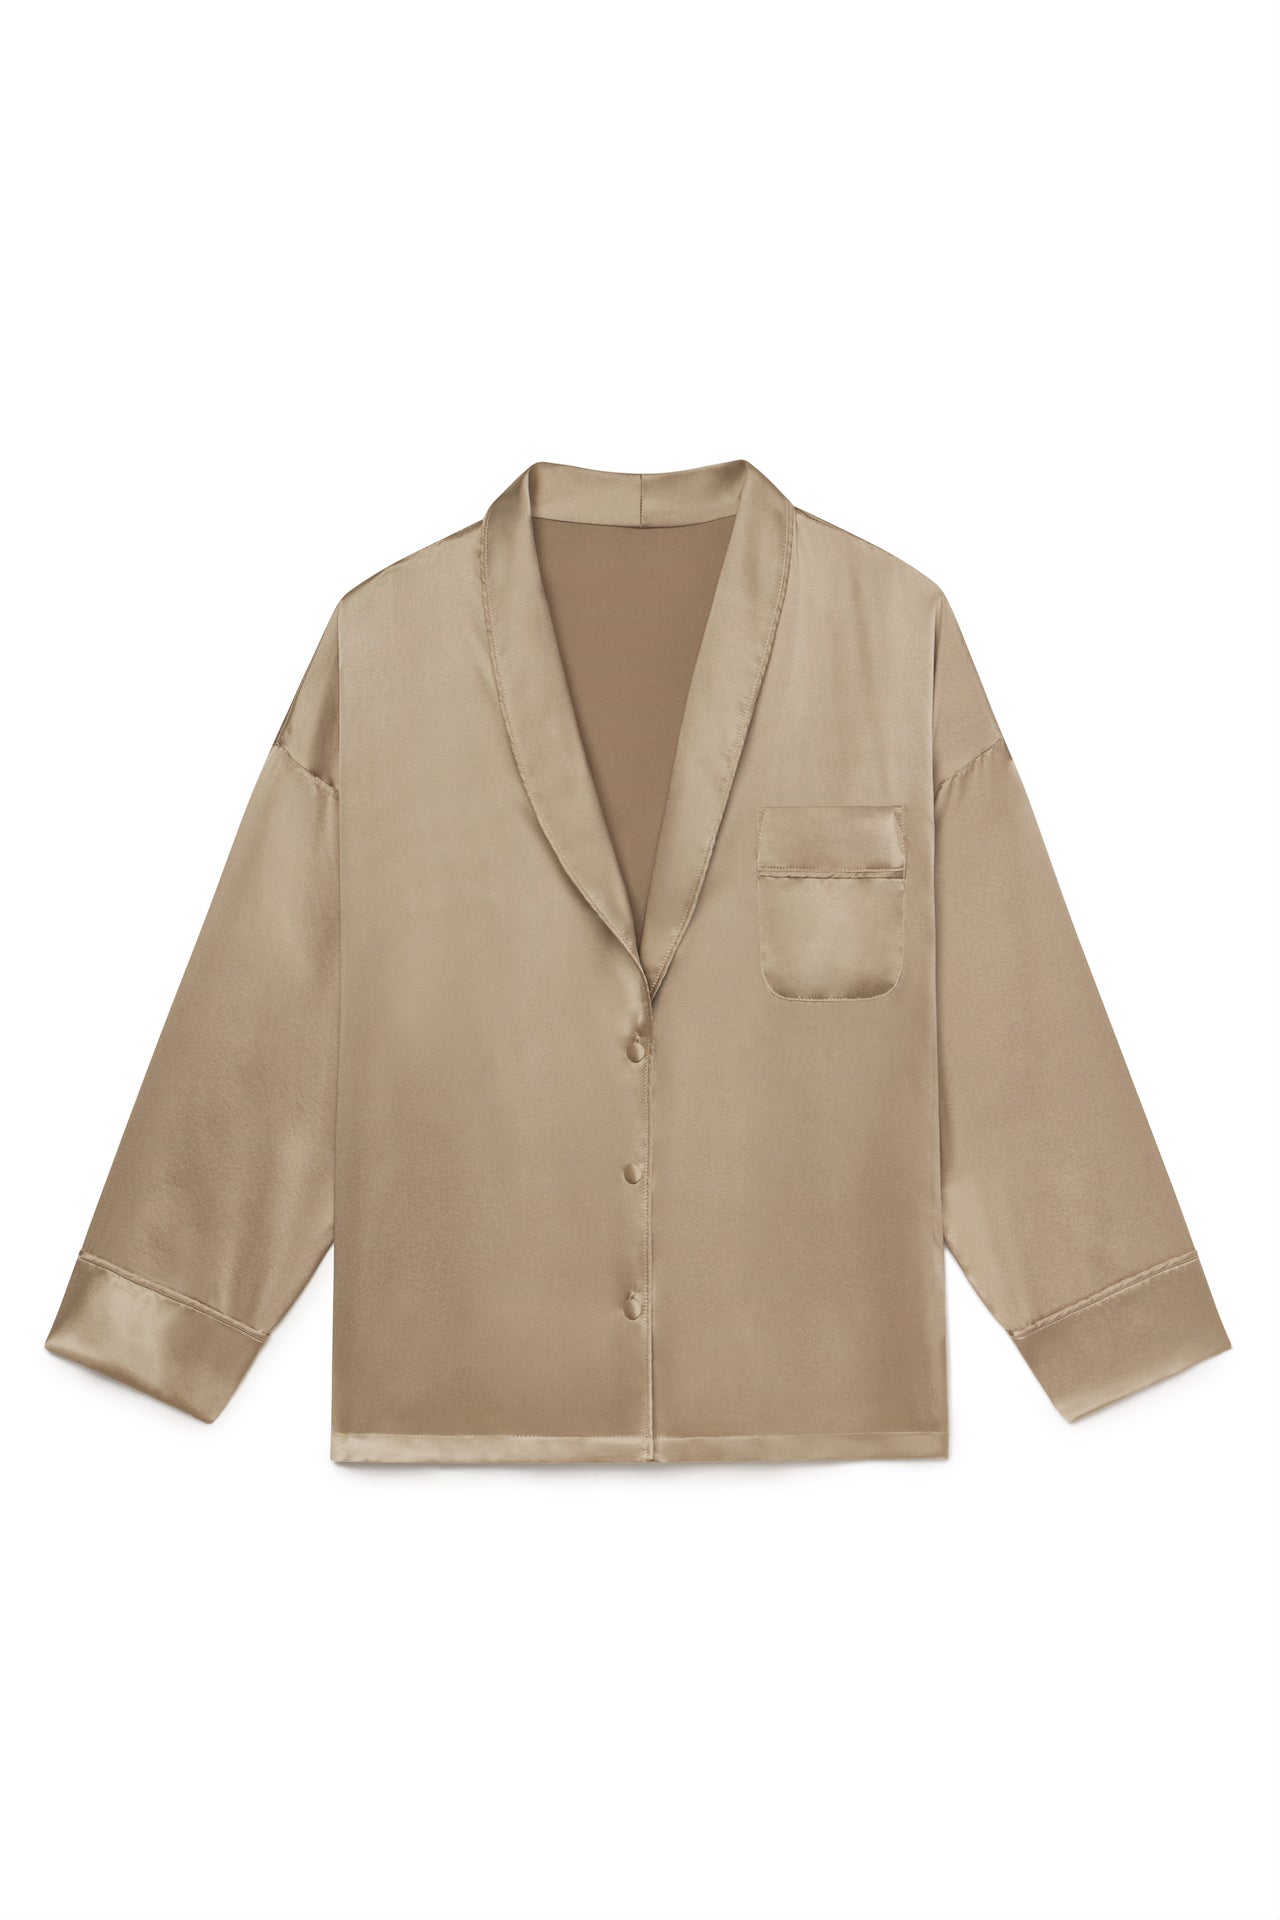 Front flat lay view of the comfortable, relaxed fit fawn Oversized Silk Button Down Long Sleeve top with a low shawl collar, front button closures and a left chest pocket